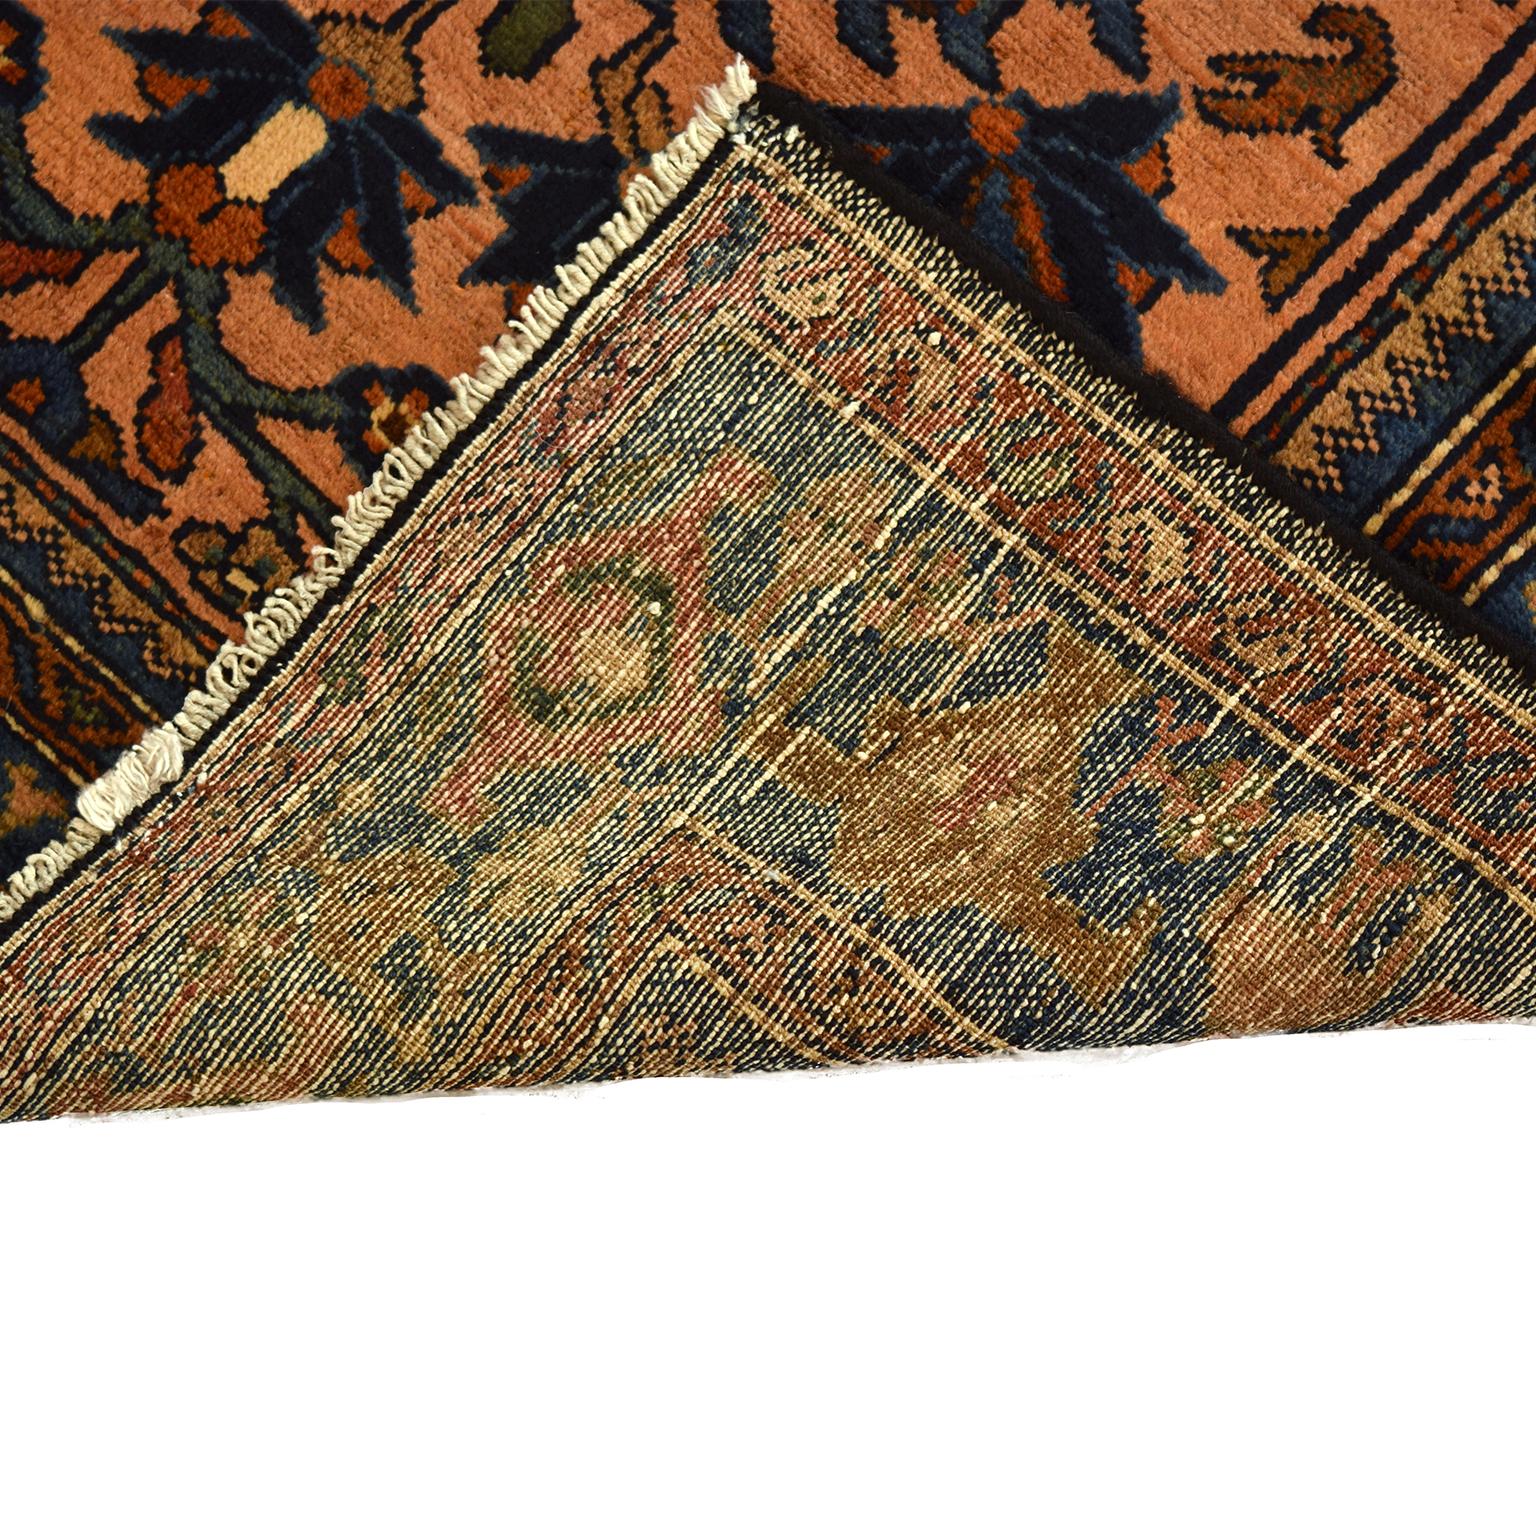 This Antique Lilihan Hamadan wool carpet measures 3’3” x 6’5” and is hand knotted in warm shades of pink, indigo blue, copper orange, forest green, and cream wool. Inspired by a traditional Persian flower garden, the design showcases a central